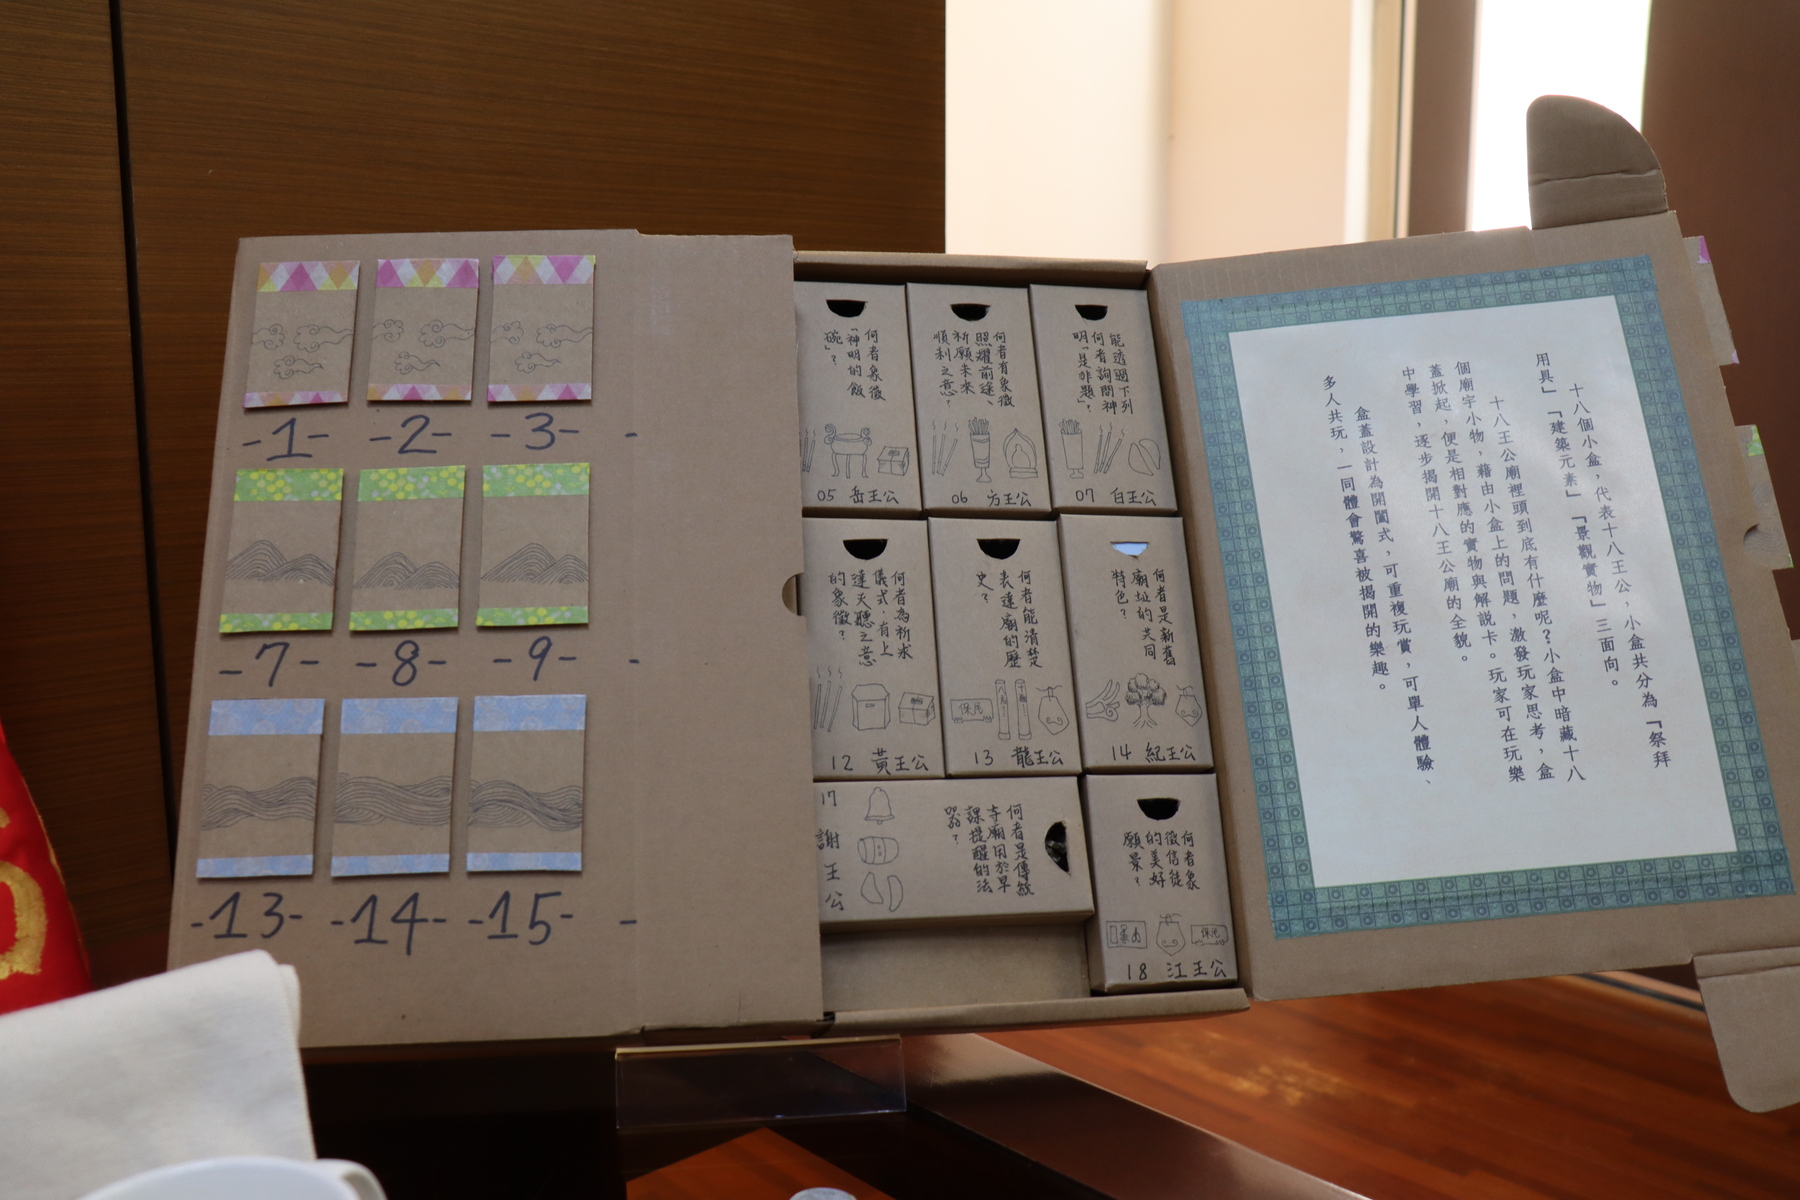 The group “Lingxing Hall Surprise Box” was made by students.